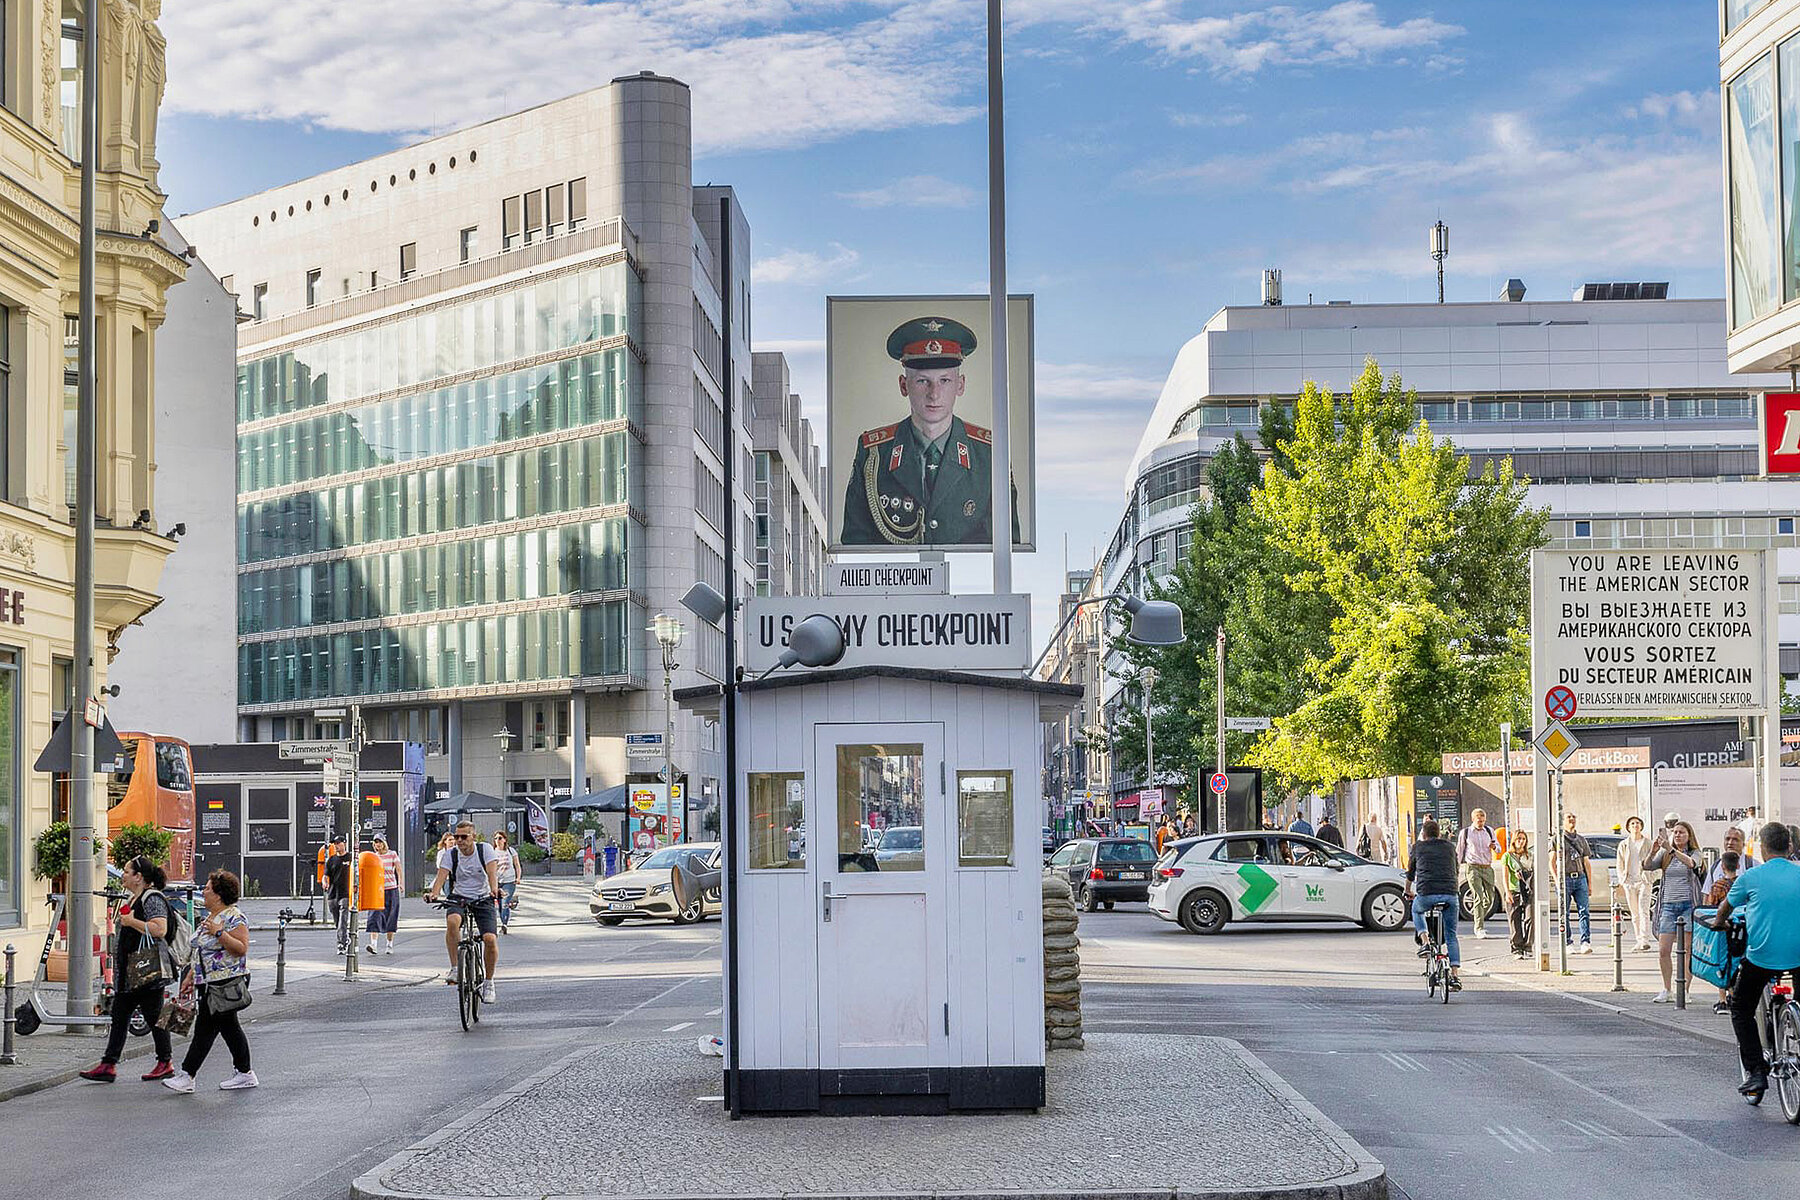 The control booth at Checkpoint Charlie stands in the middle of the street. People walk and ride by on bicycles. There are several new buildings on the side of the road.